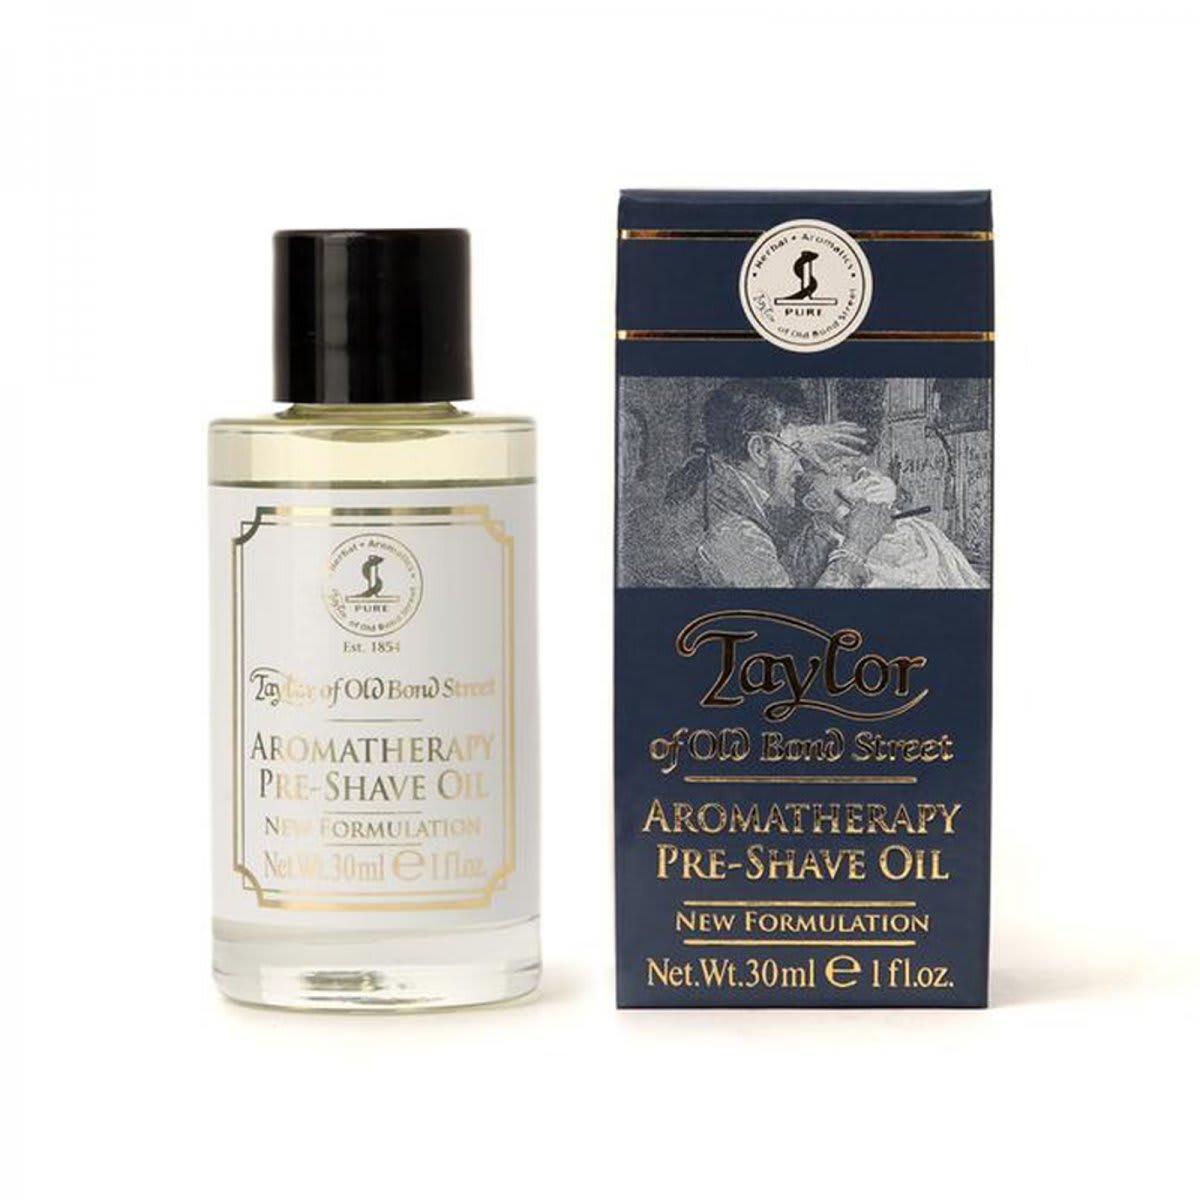 Taylor Of Old Bond Street Aromatherapy Pre-Shave Oil 30 ml